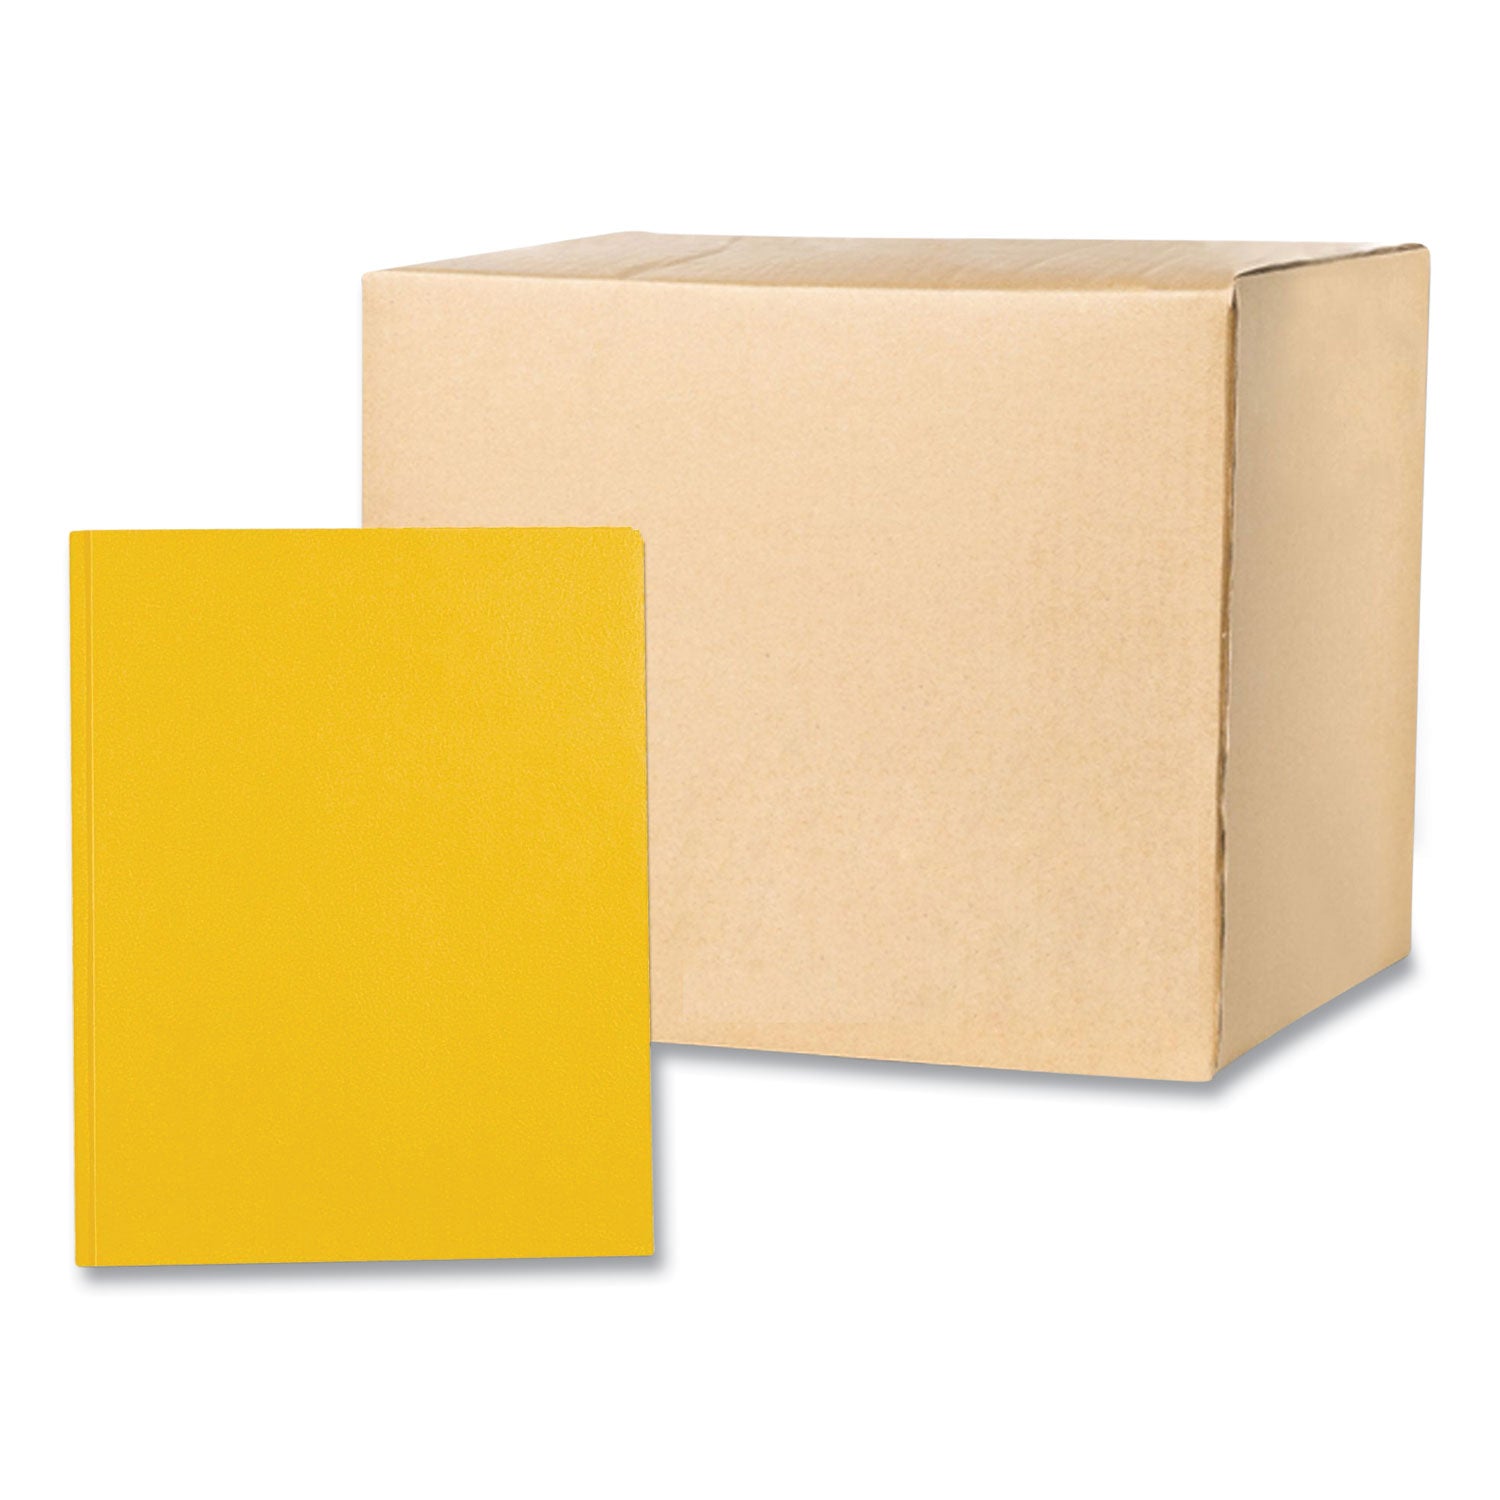 pocket-folder-with-3-fasteners-05-capacity-11-x-85-yellow-25-box-10-boxes-carton-ships-in-4-6-business-days_roa54125cs - 1